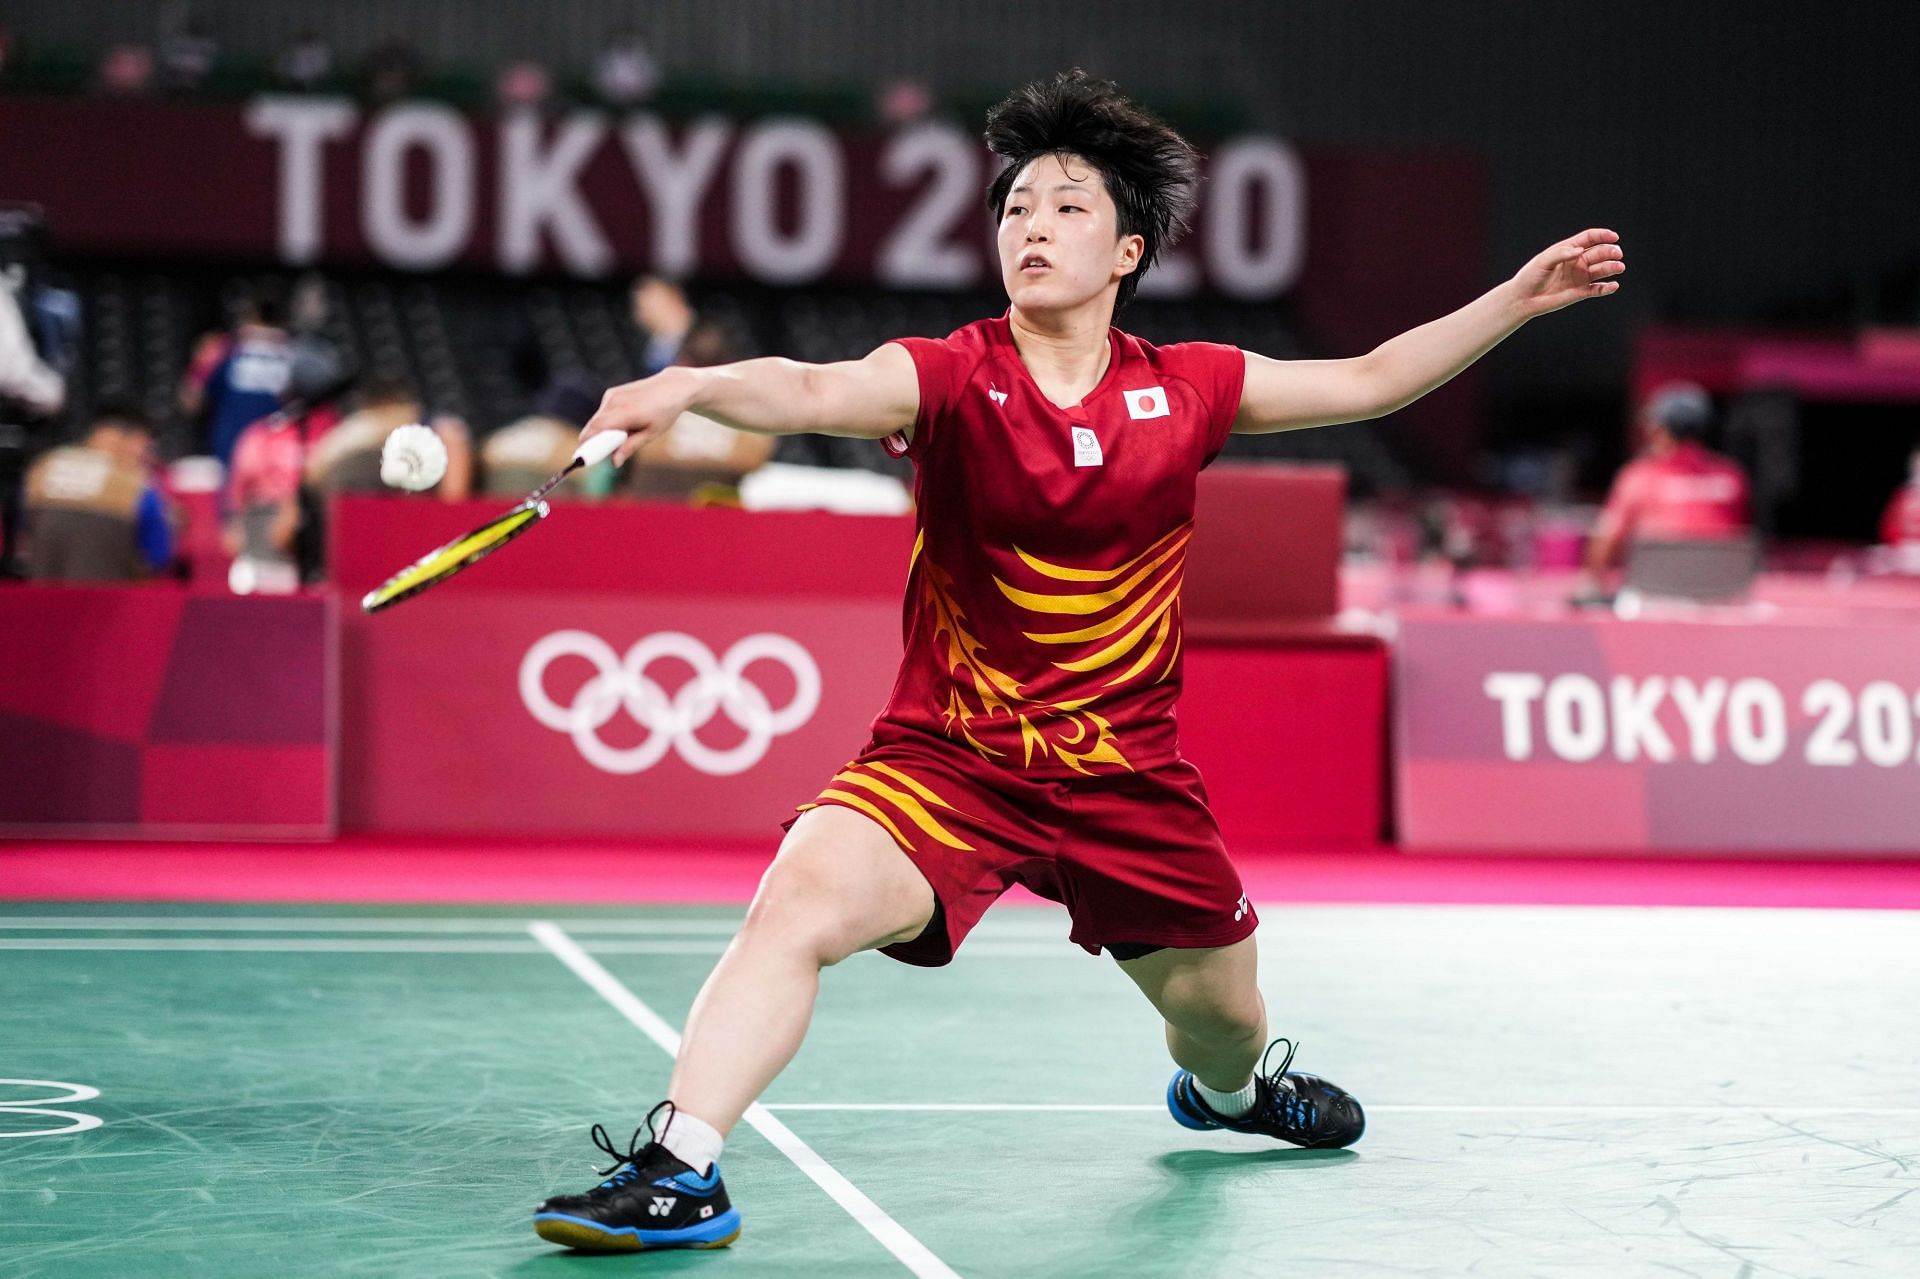 Akane Yamaguchi's stamina is unmatched in the badminton world (Image: BWF fansite)